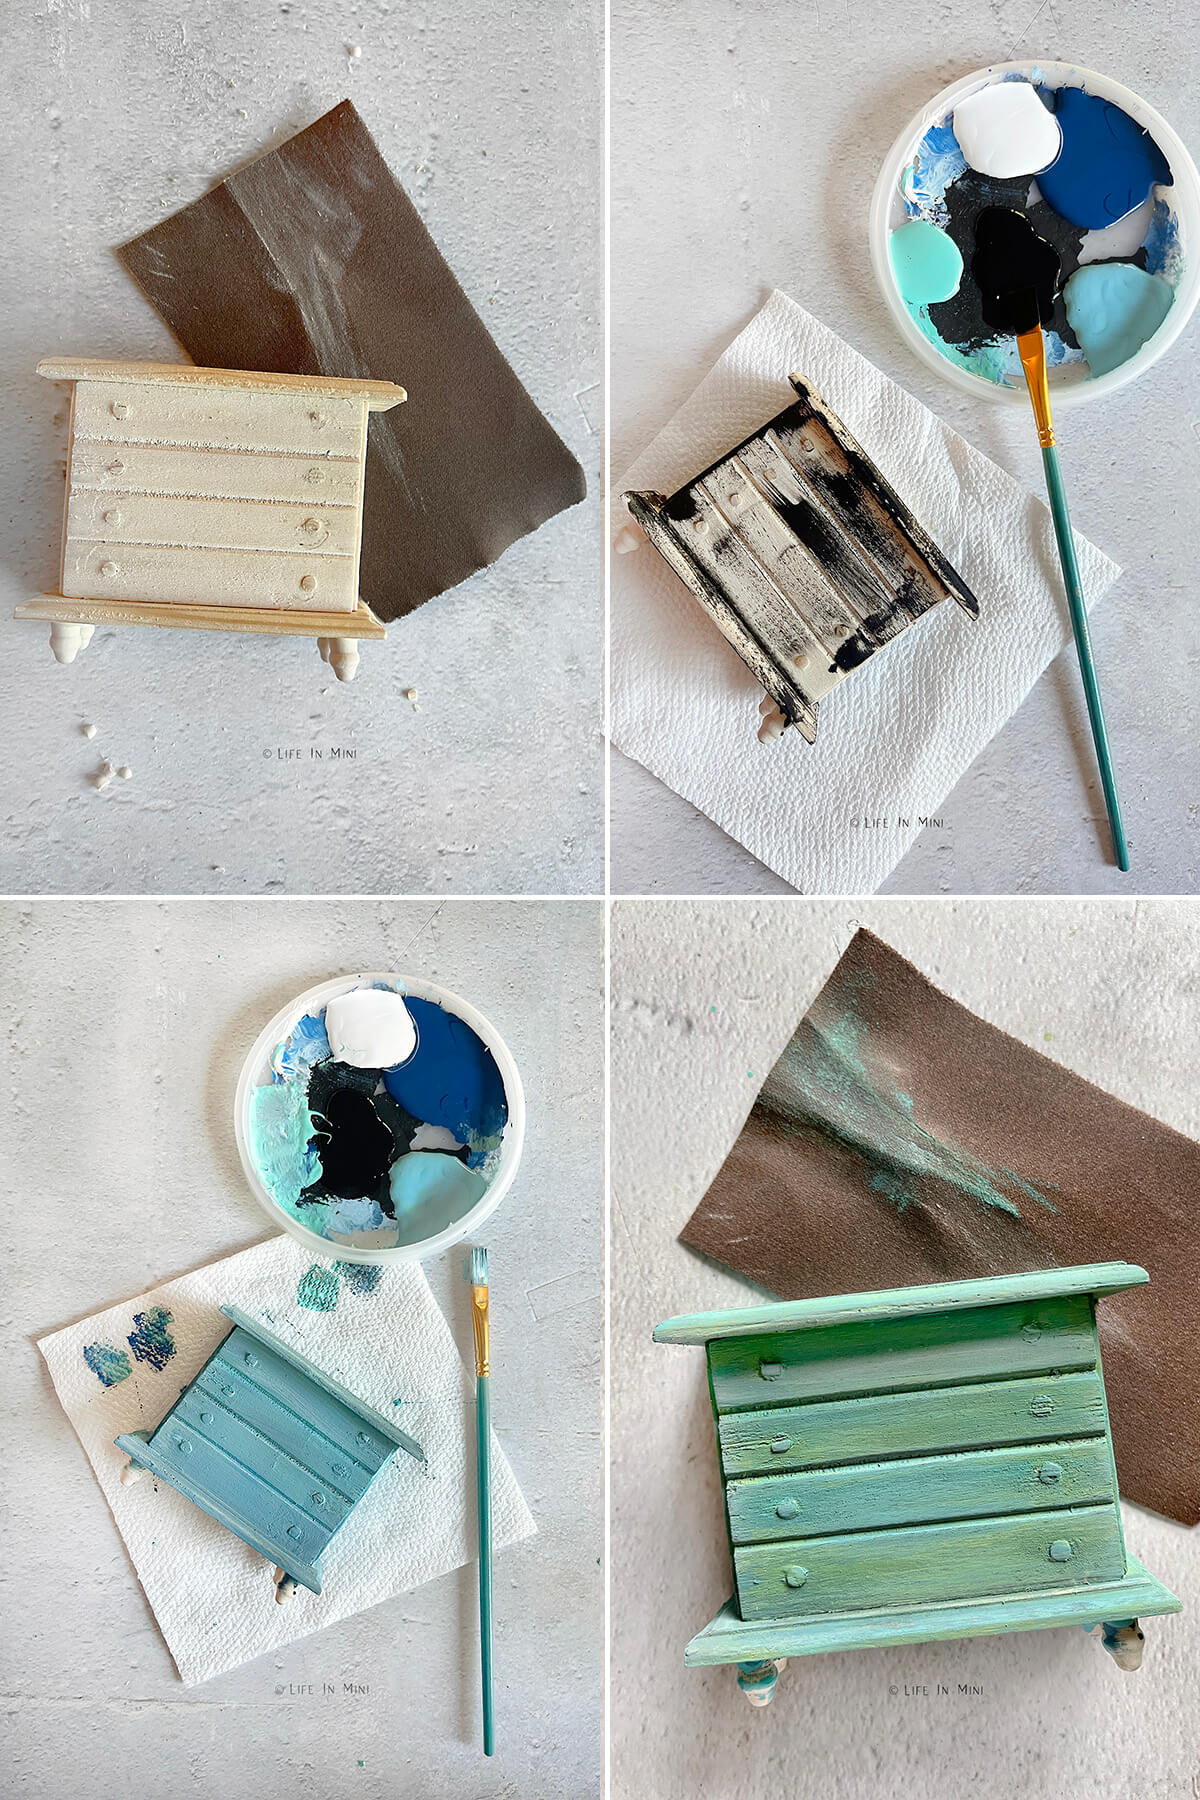 Collage of 4 pictures showing how I sanded and painted a teal dollhouse dresser